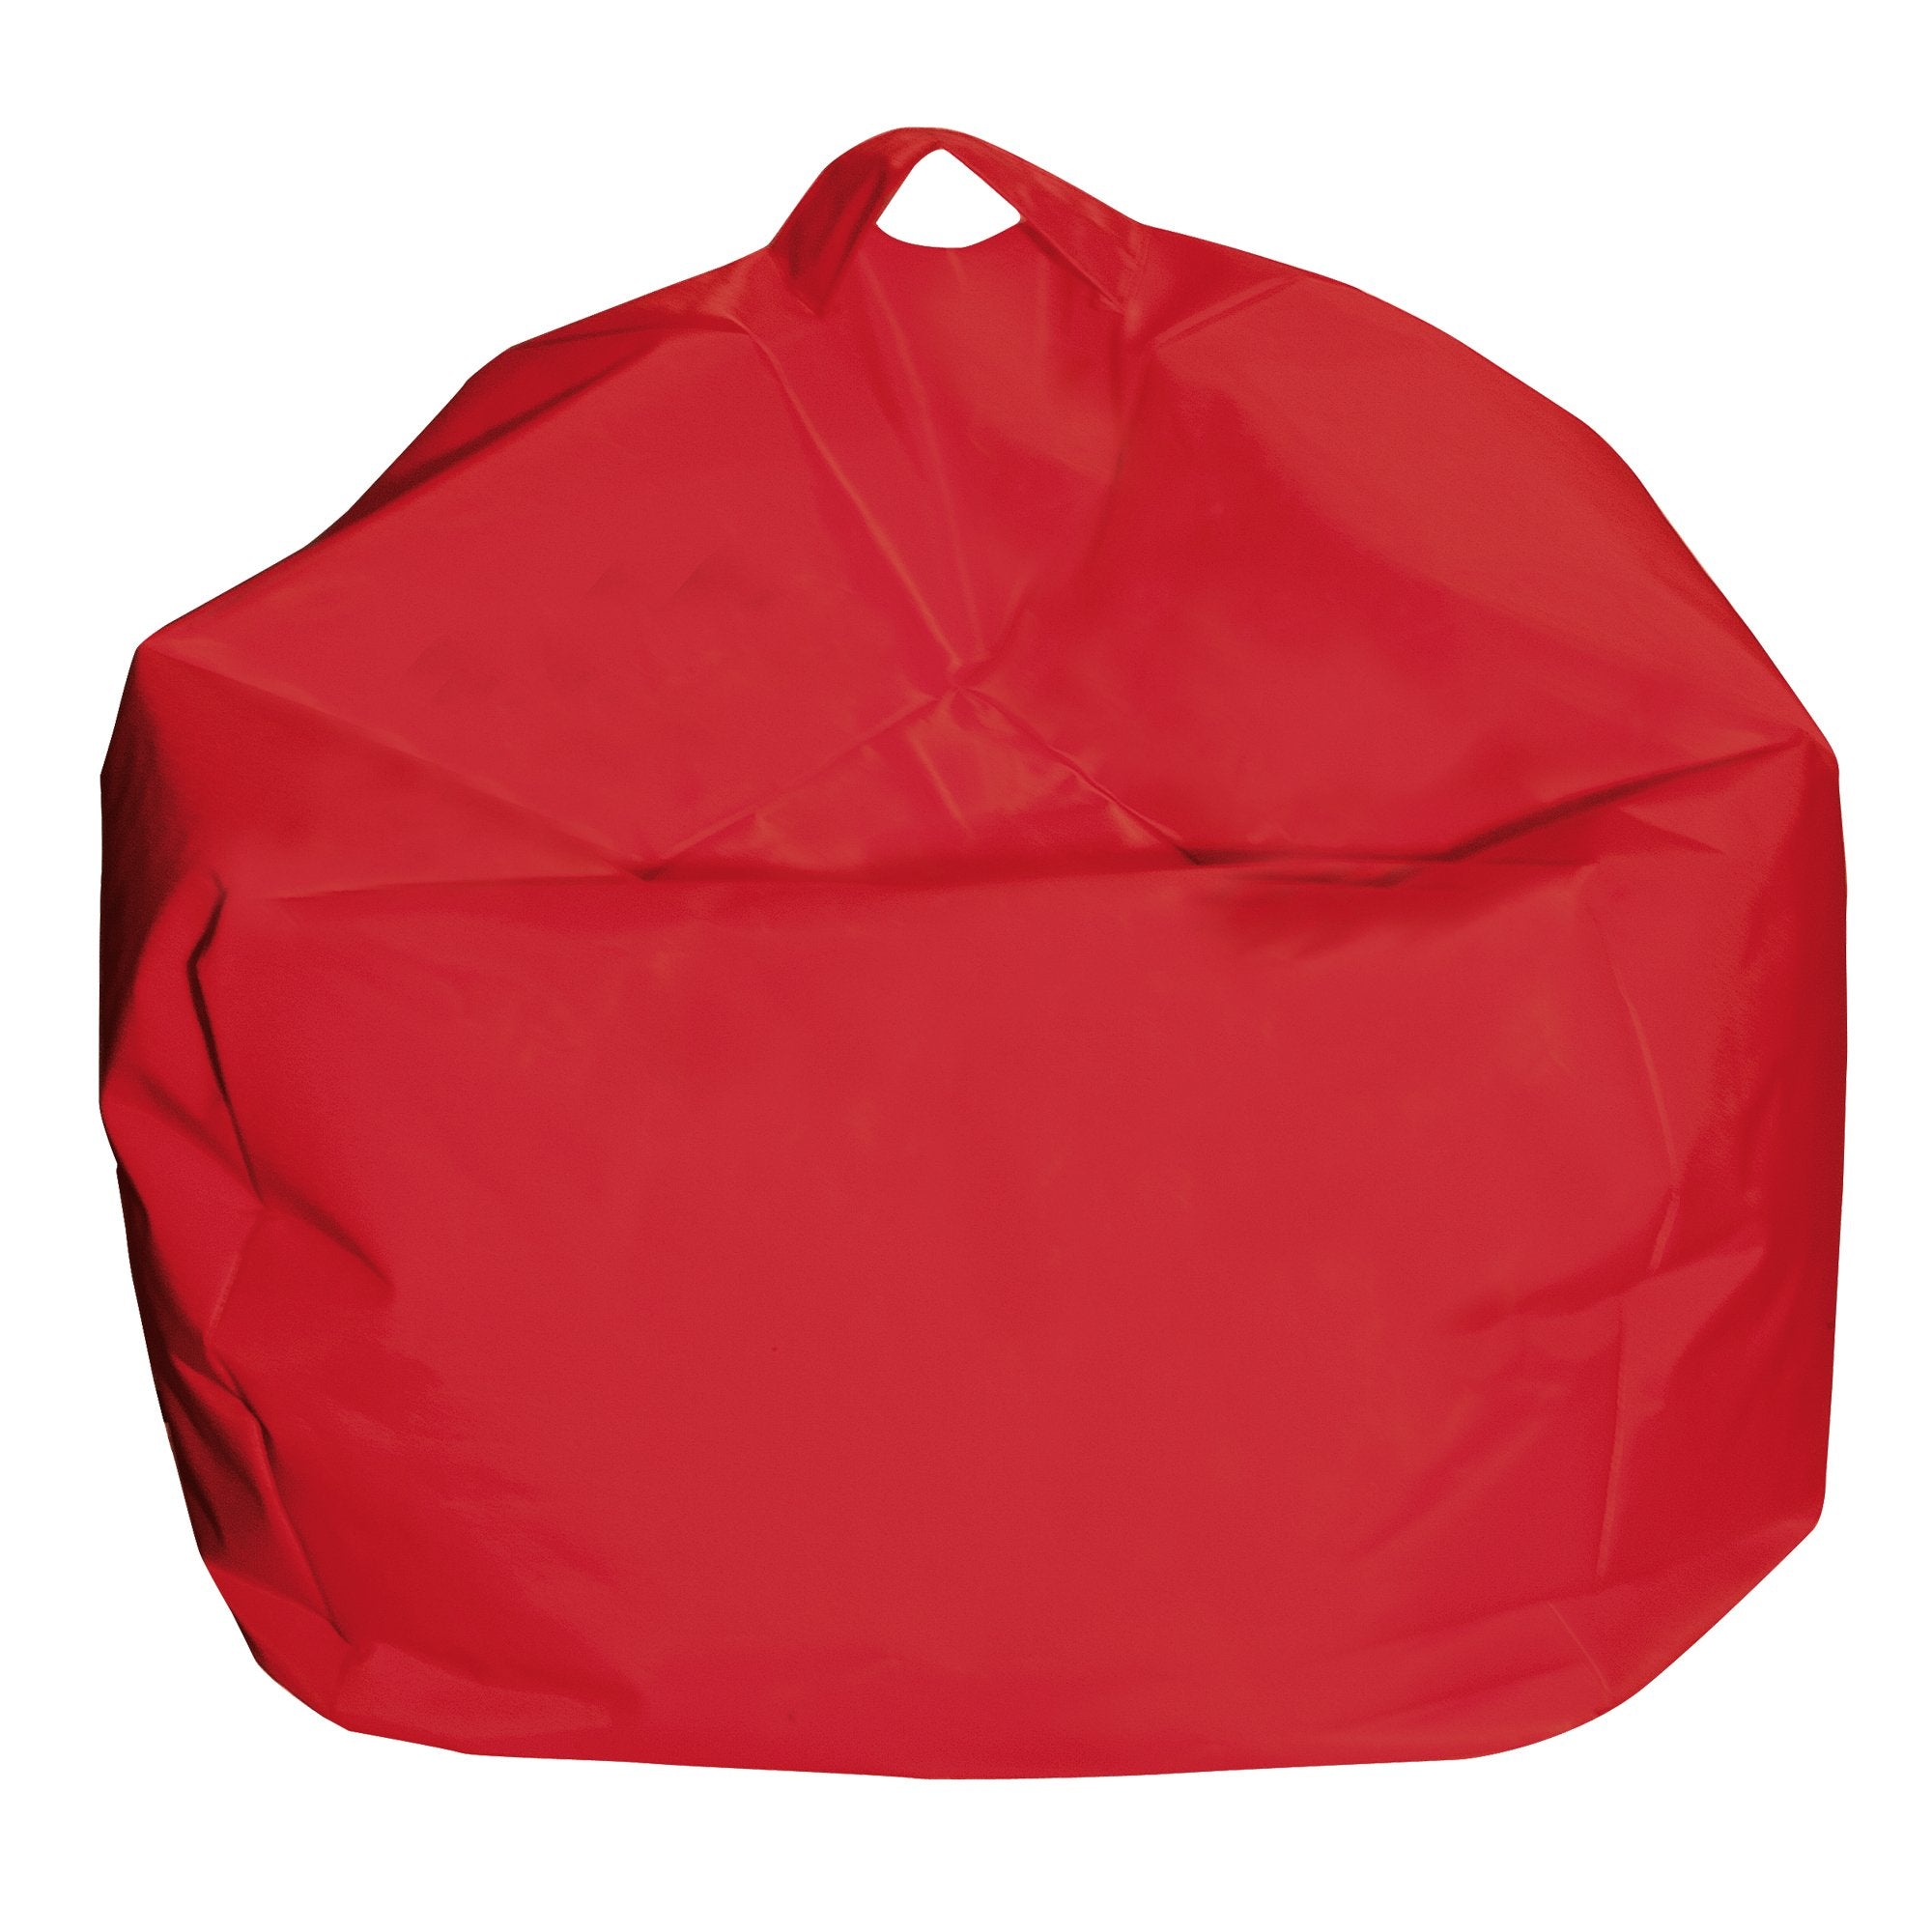 king-collection-pouf-comodone-rosso-h-62x65-d-cm